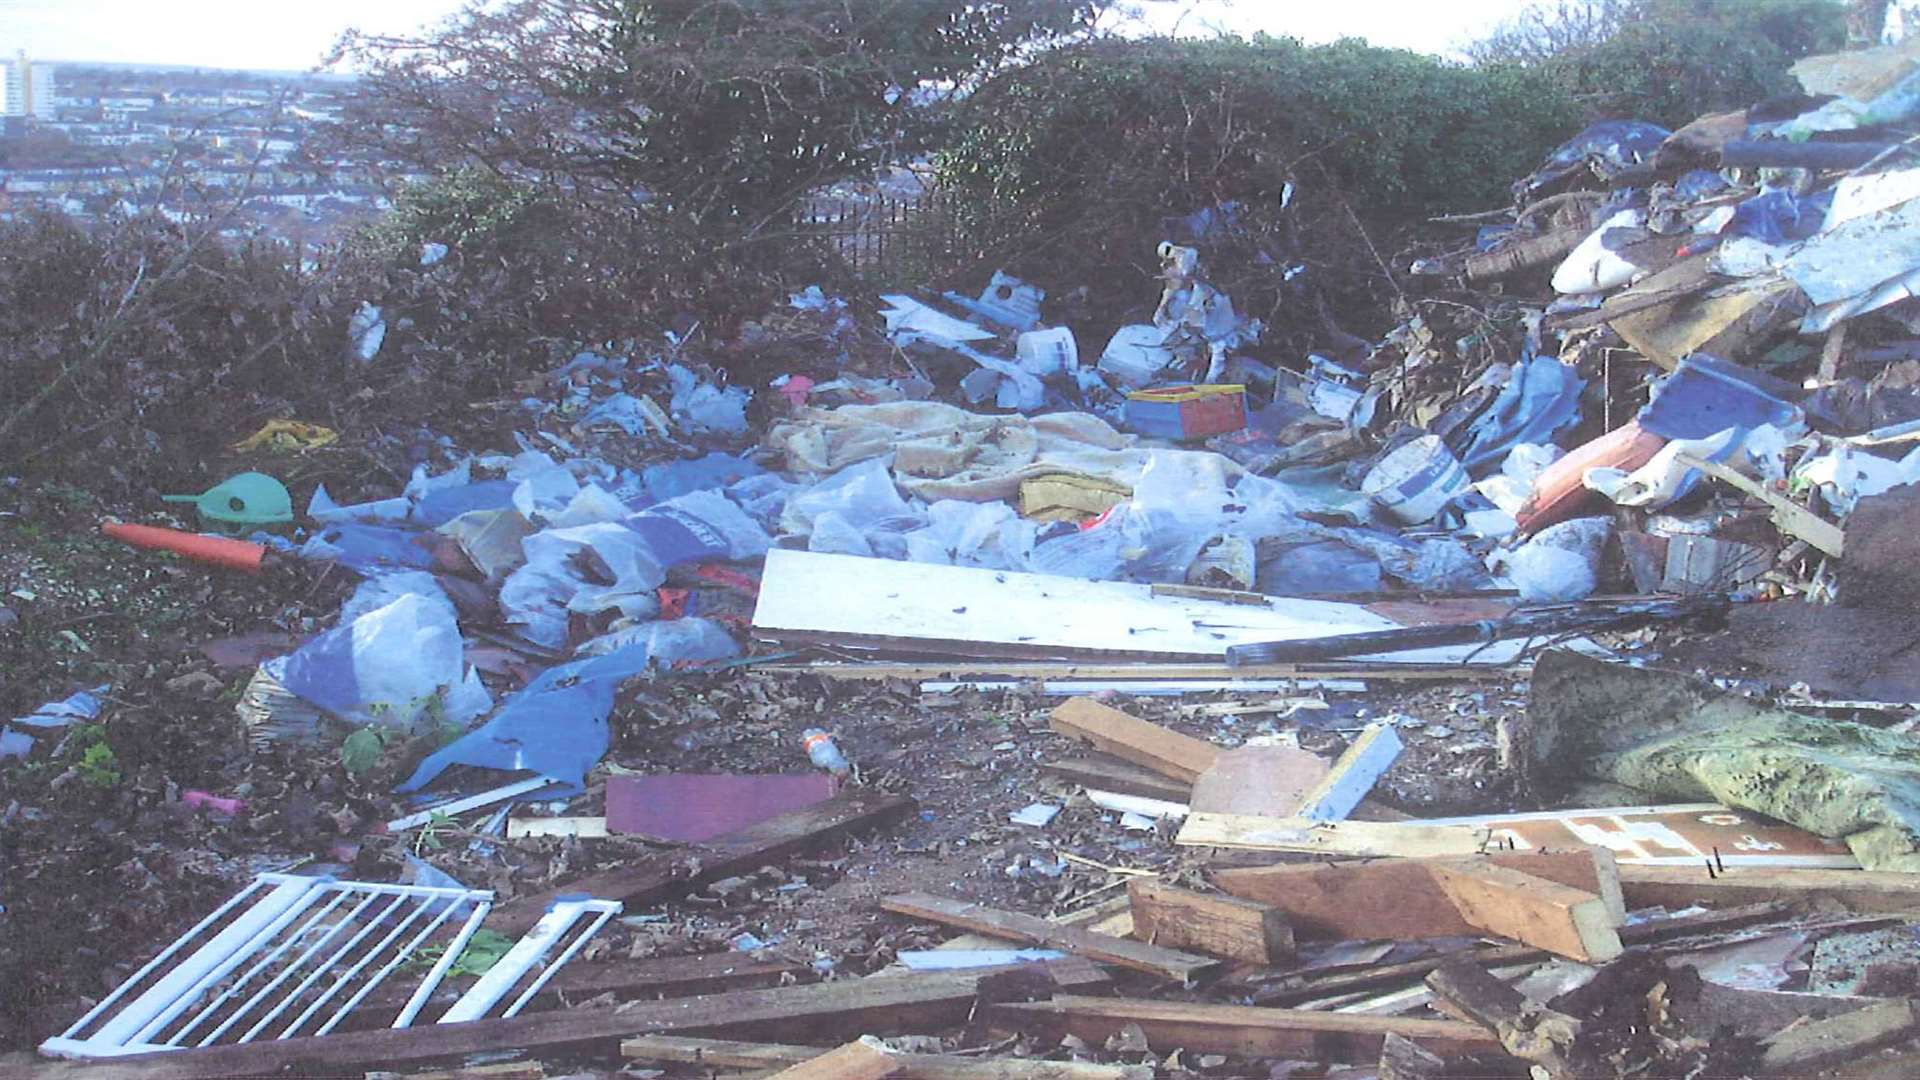 Dobson unlawfully lived on land owned by Southern Water where tonnes of rubbish was dumped